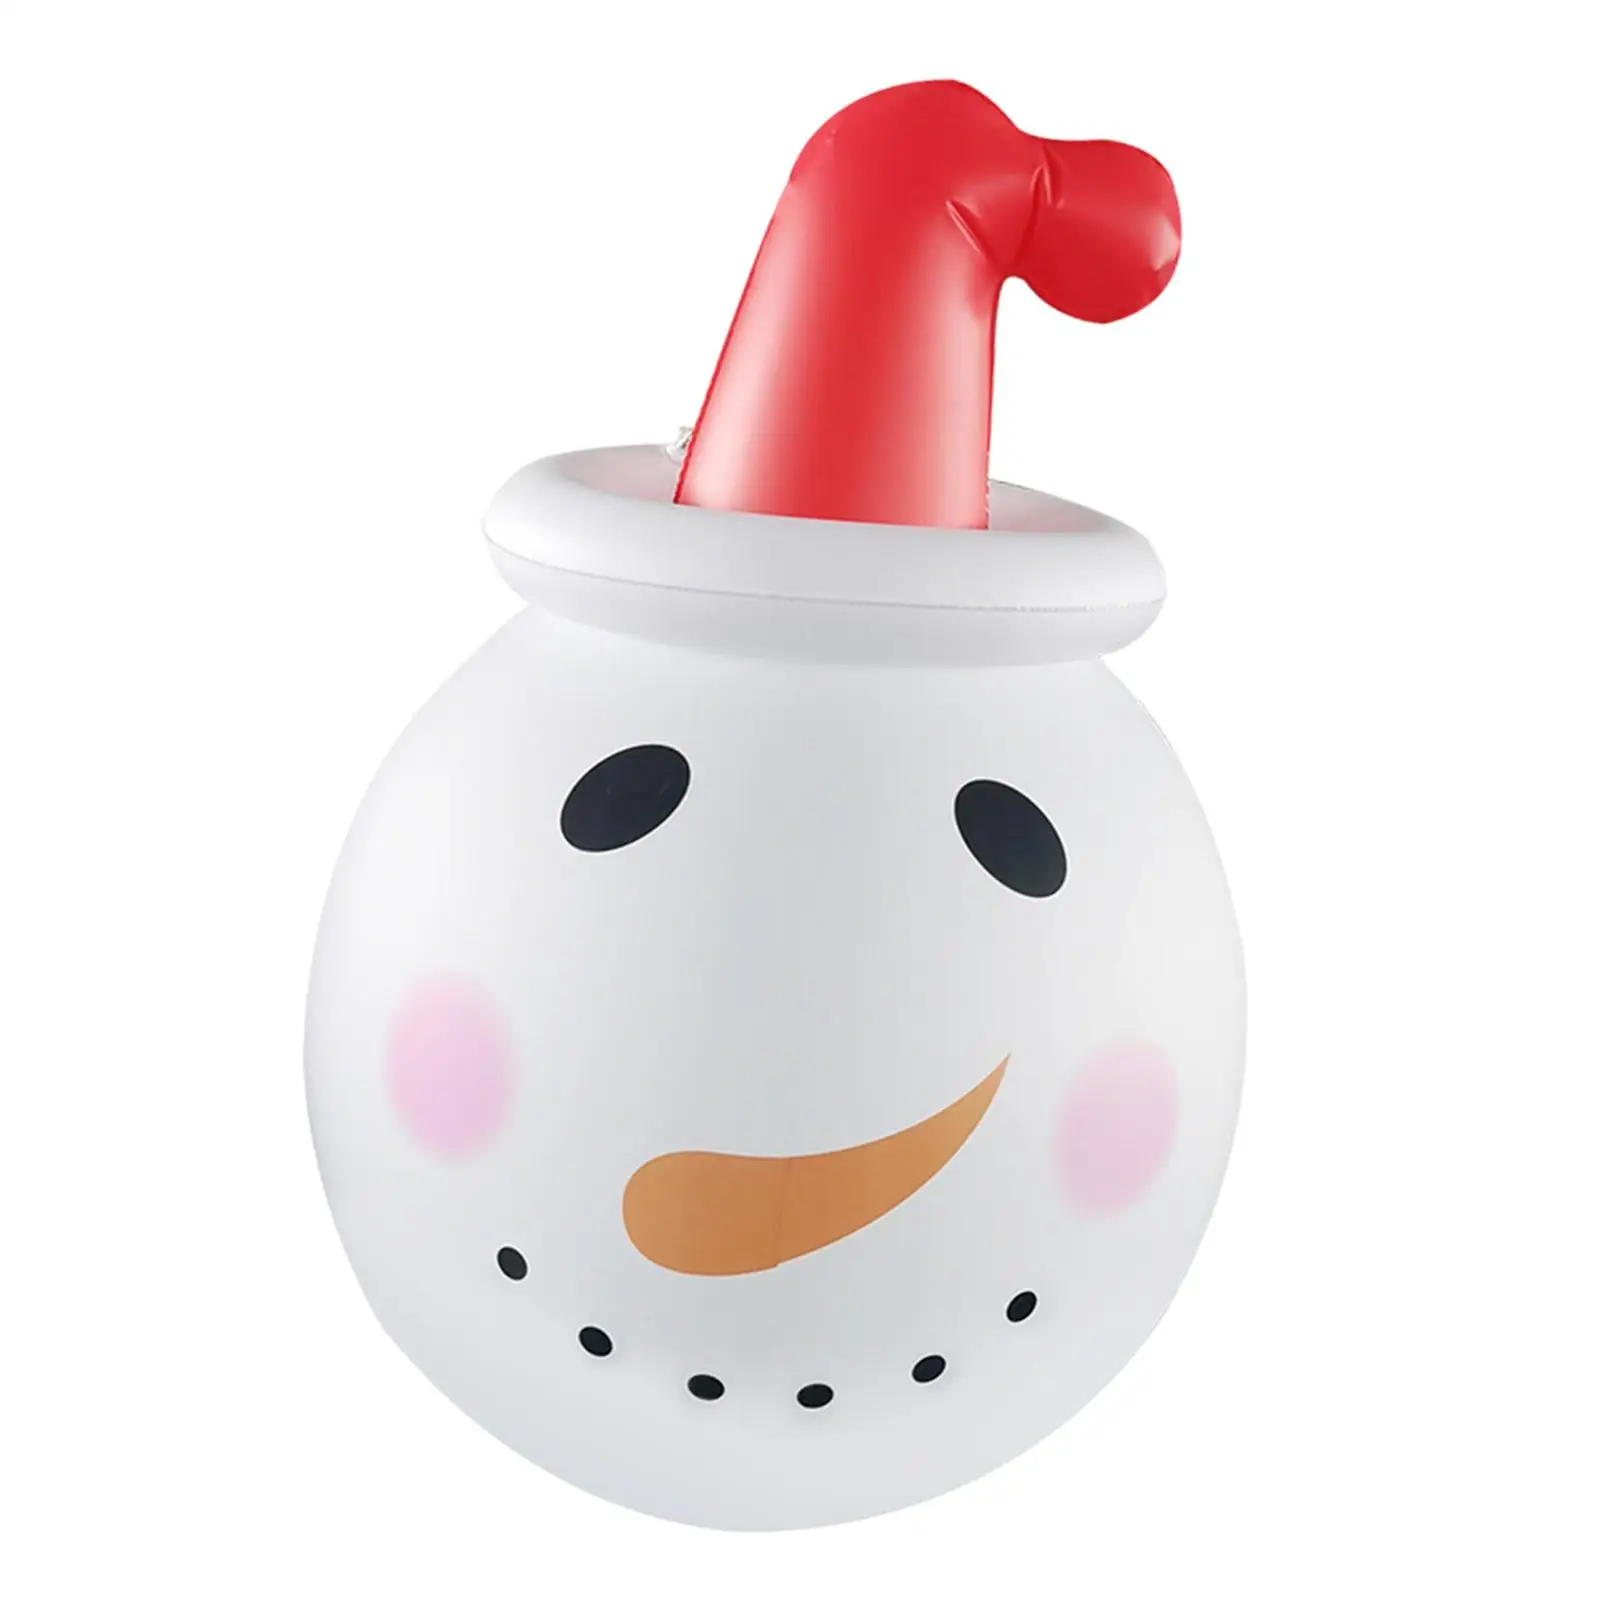 Christmas Inflatable Snowman Ornament Adorable for Yard New Year Living Room